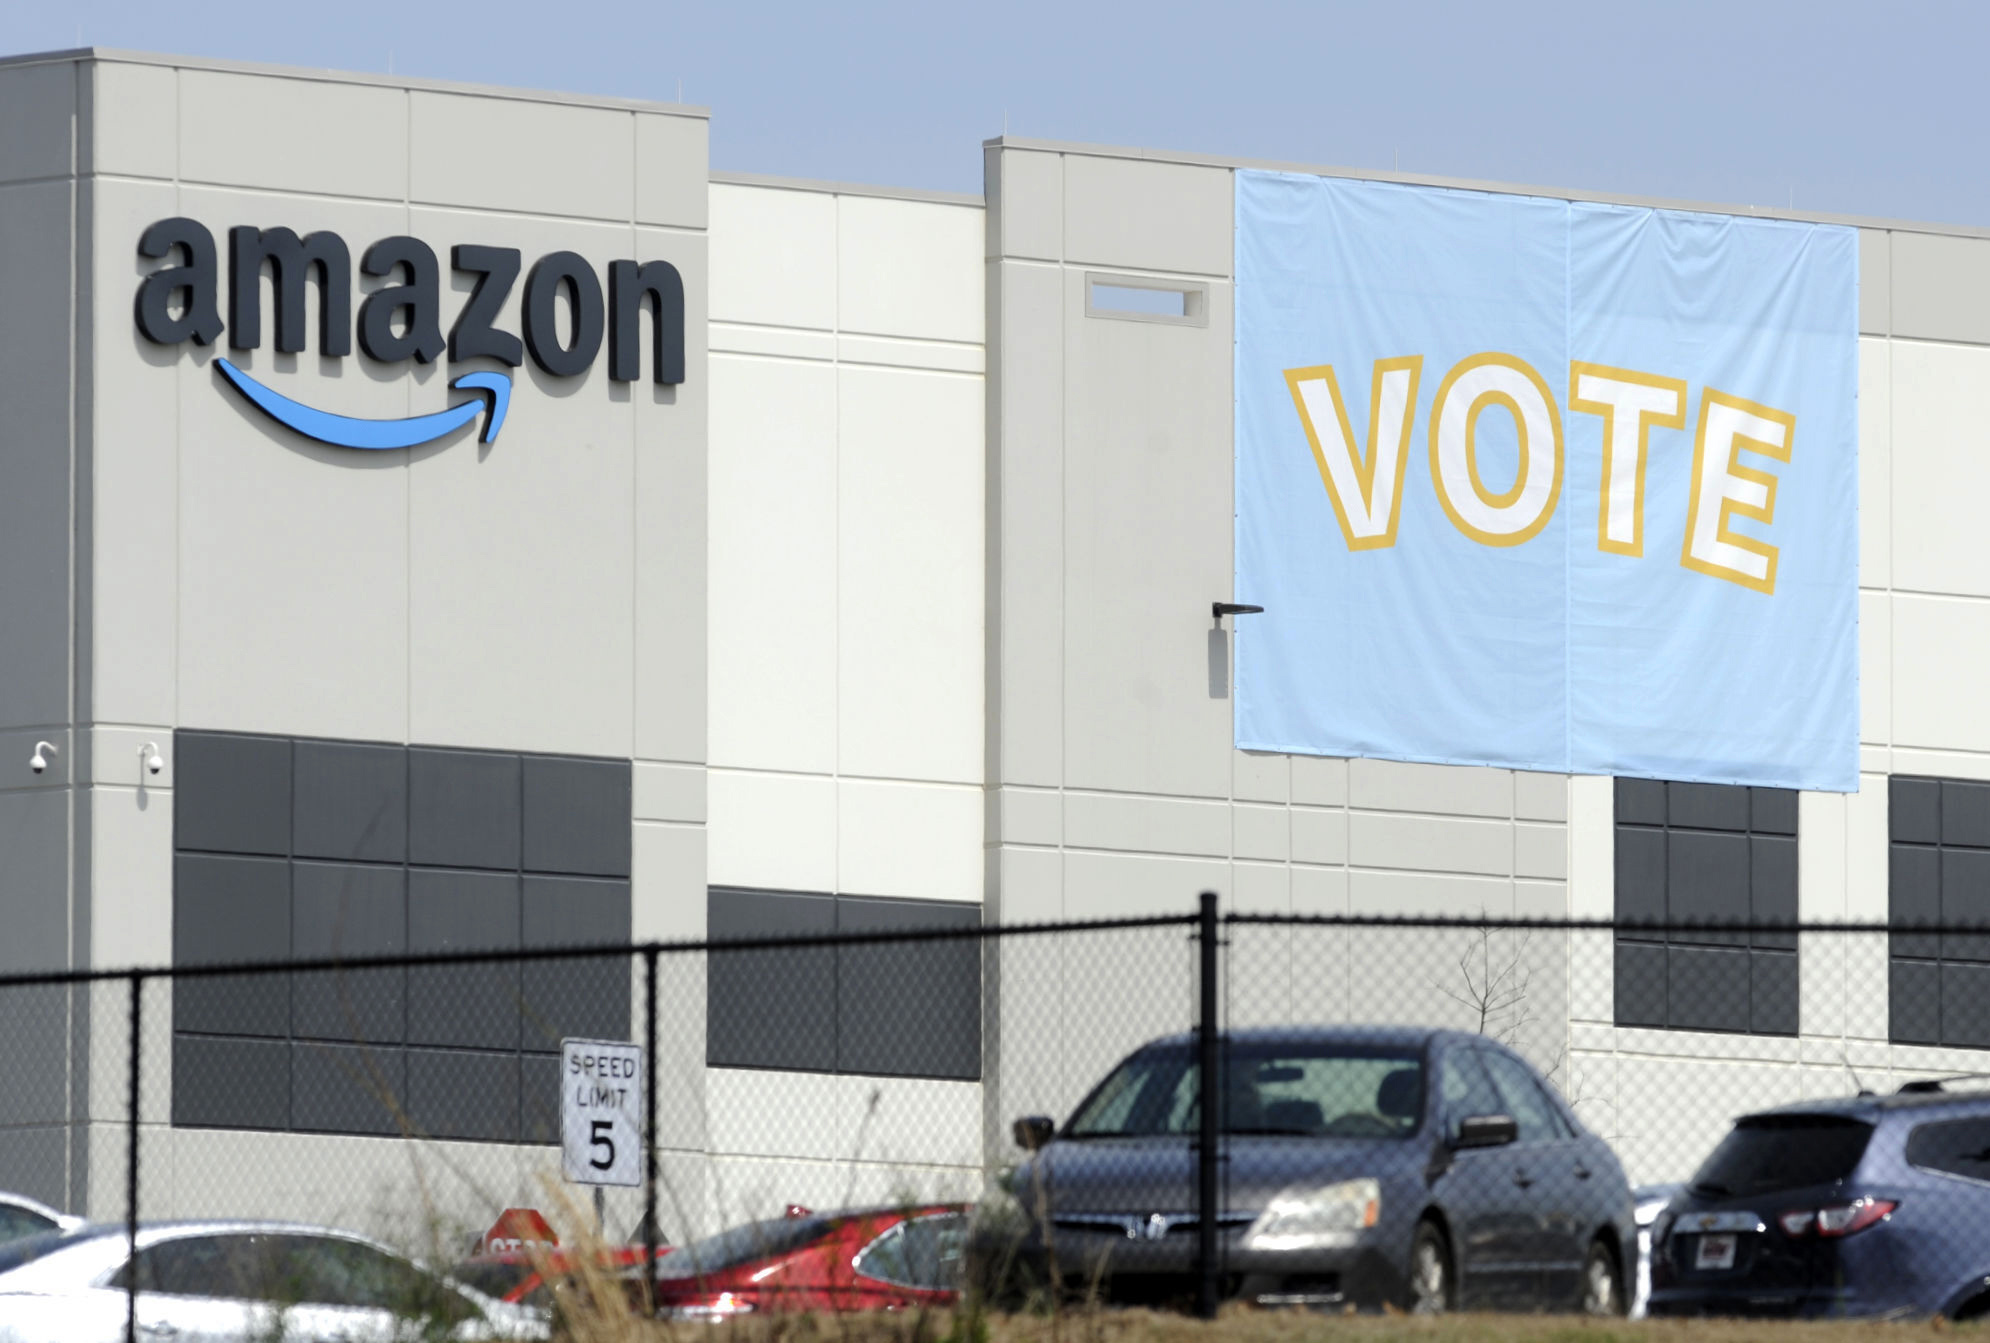 PHOTO: A banner encouraging workers to vote in labor balloting is shown at an Amazon warehouse in Bessemer, Ala., March 30, 2021.